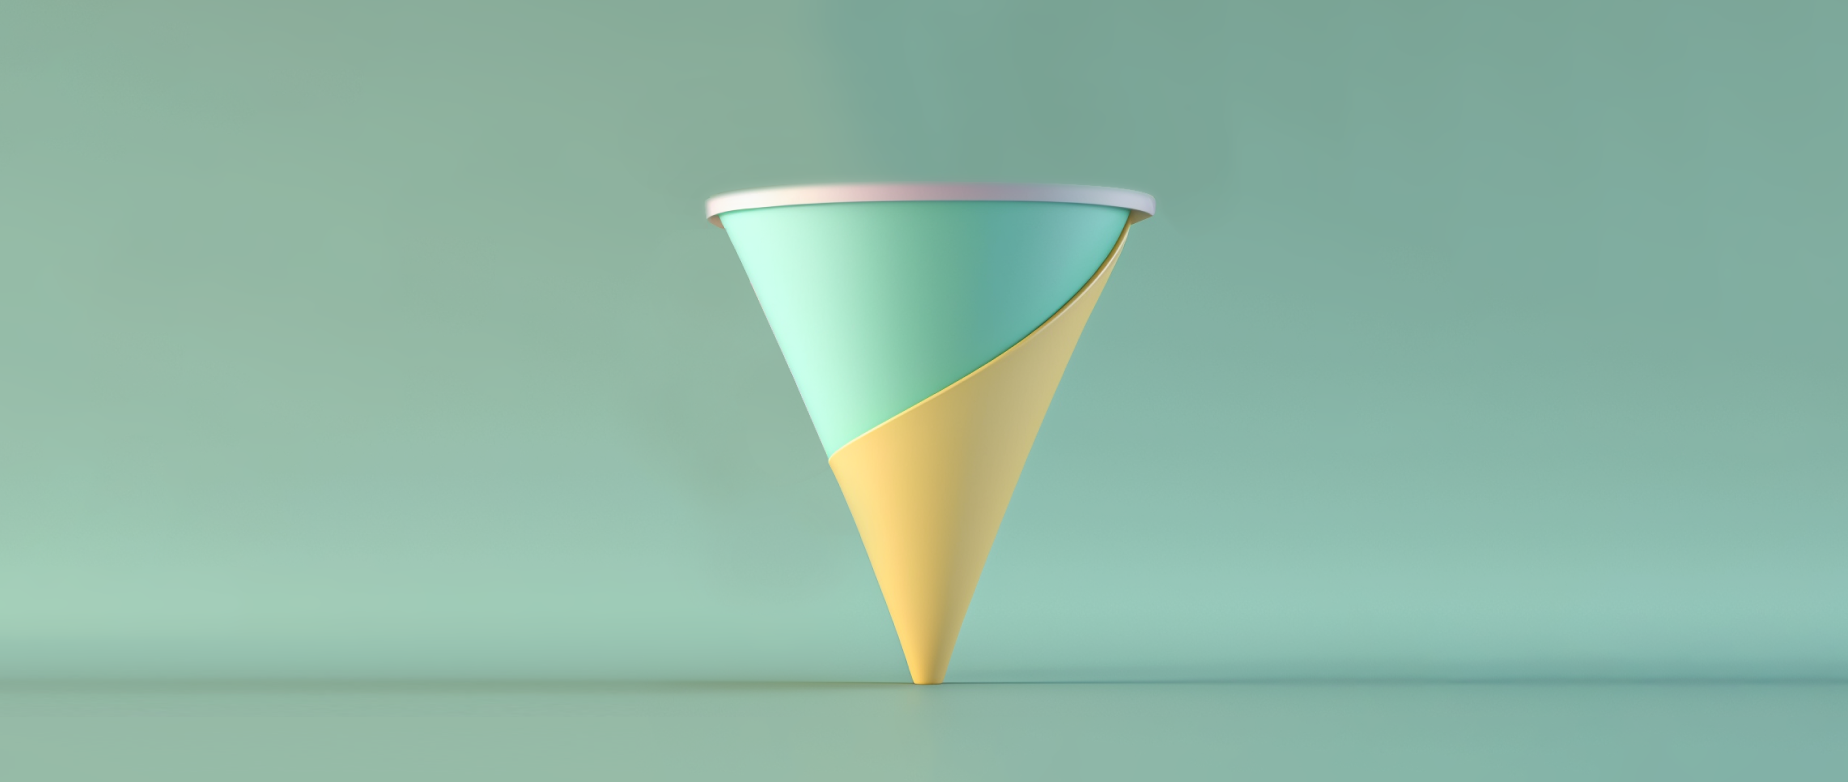 Illustration of a paper cone representing the concept of a CRO funnel